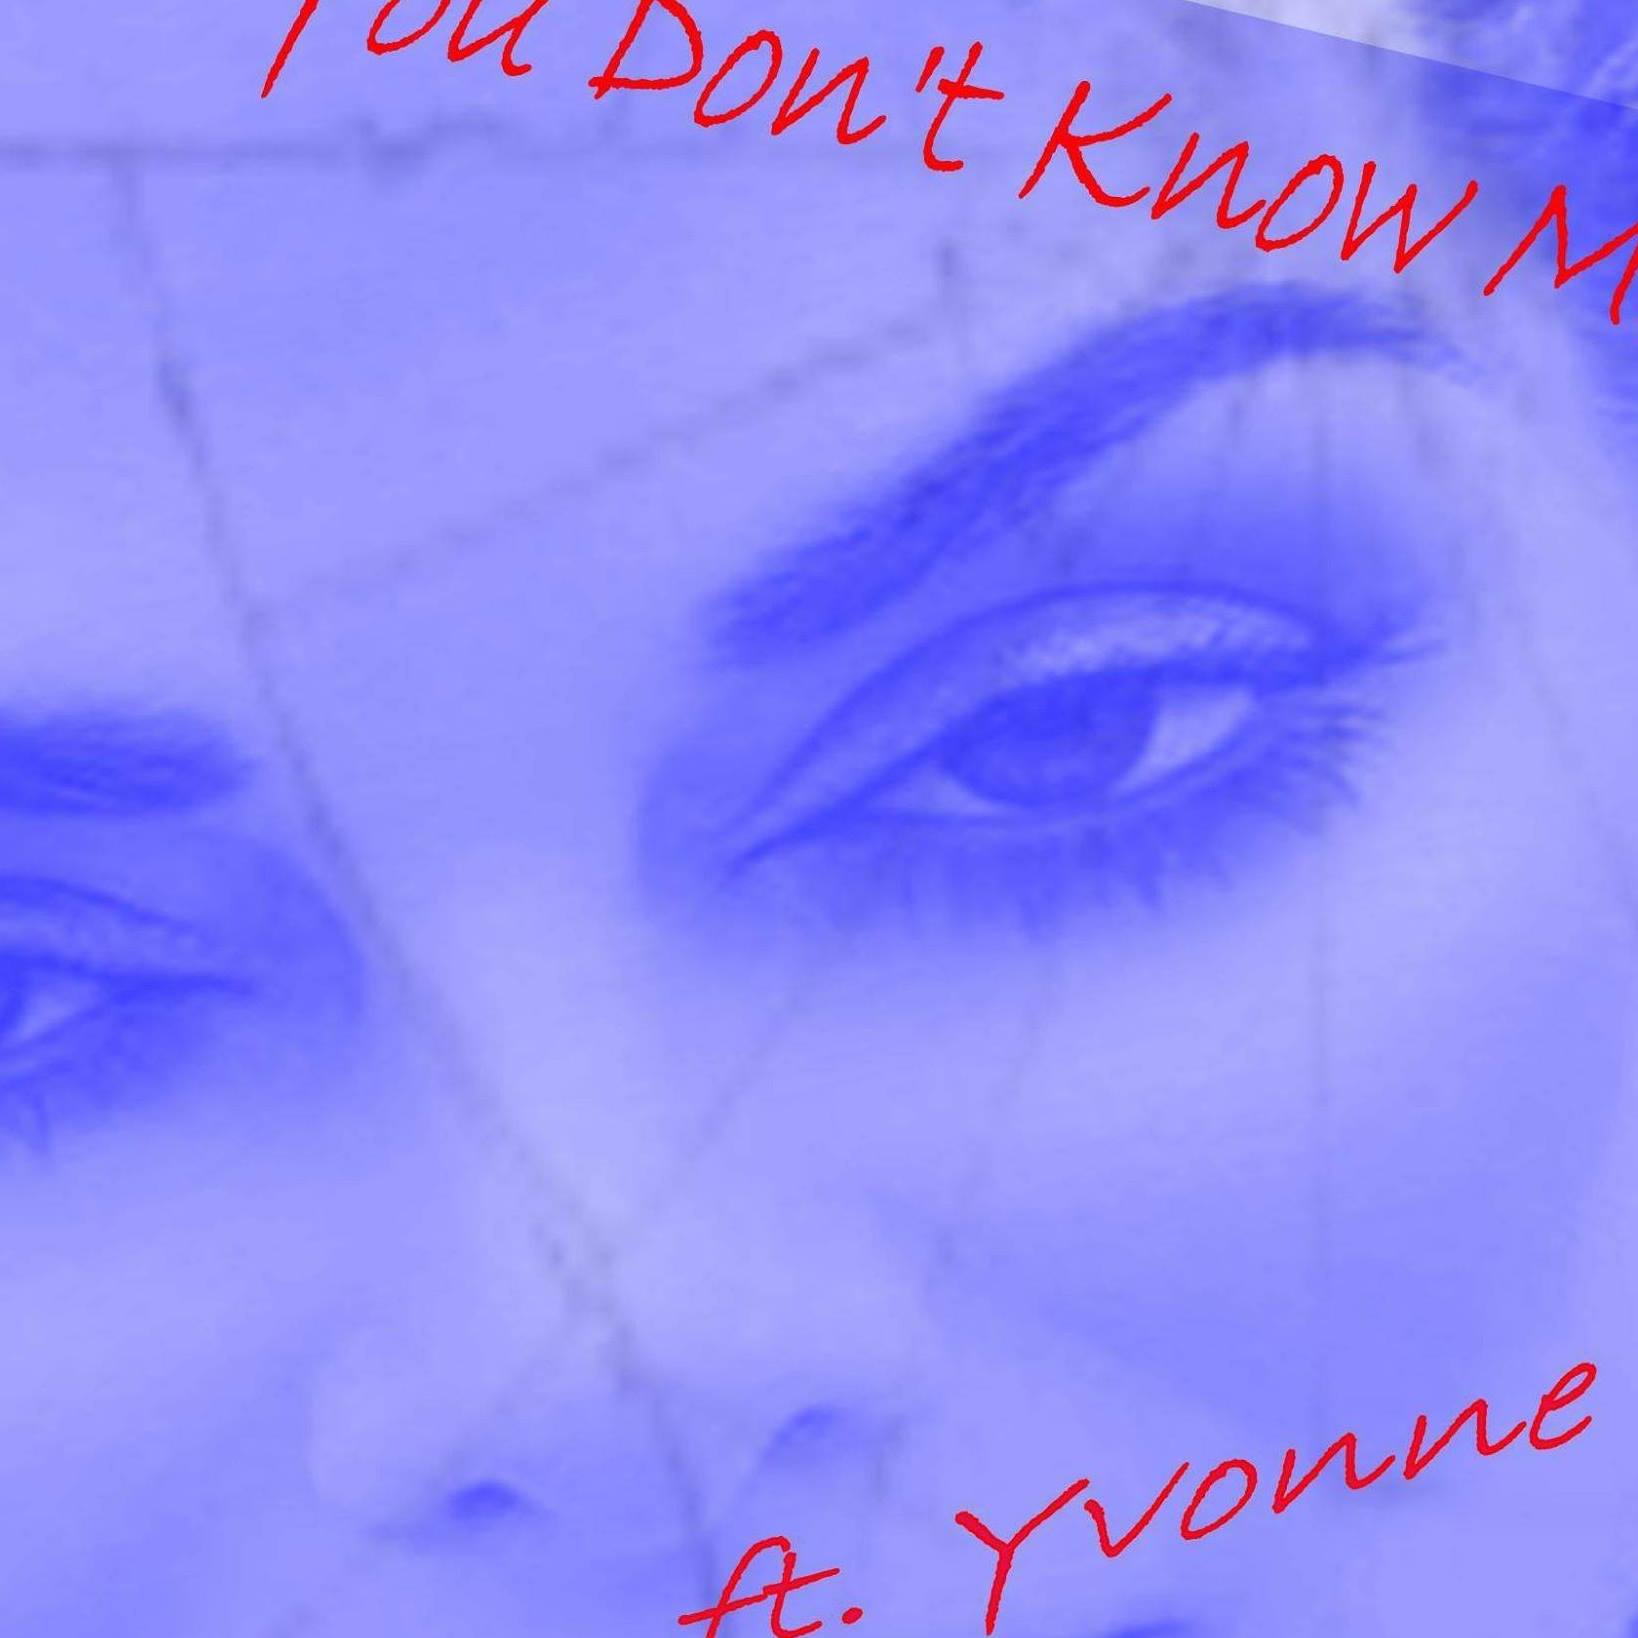 8.You Don t Love Me - You Don t Know me